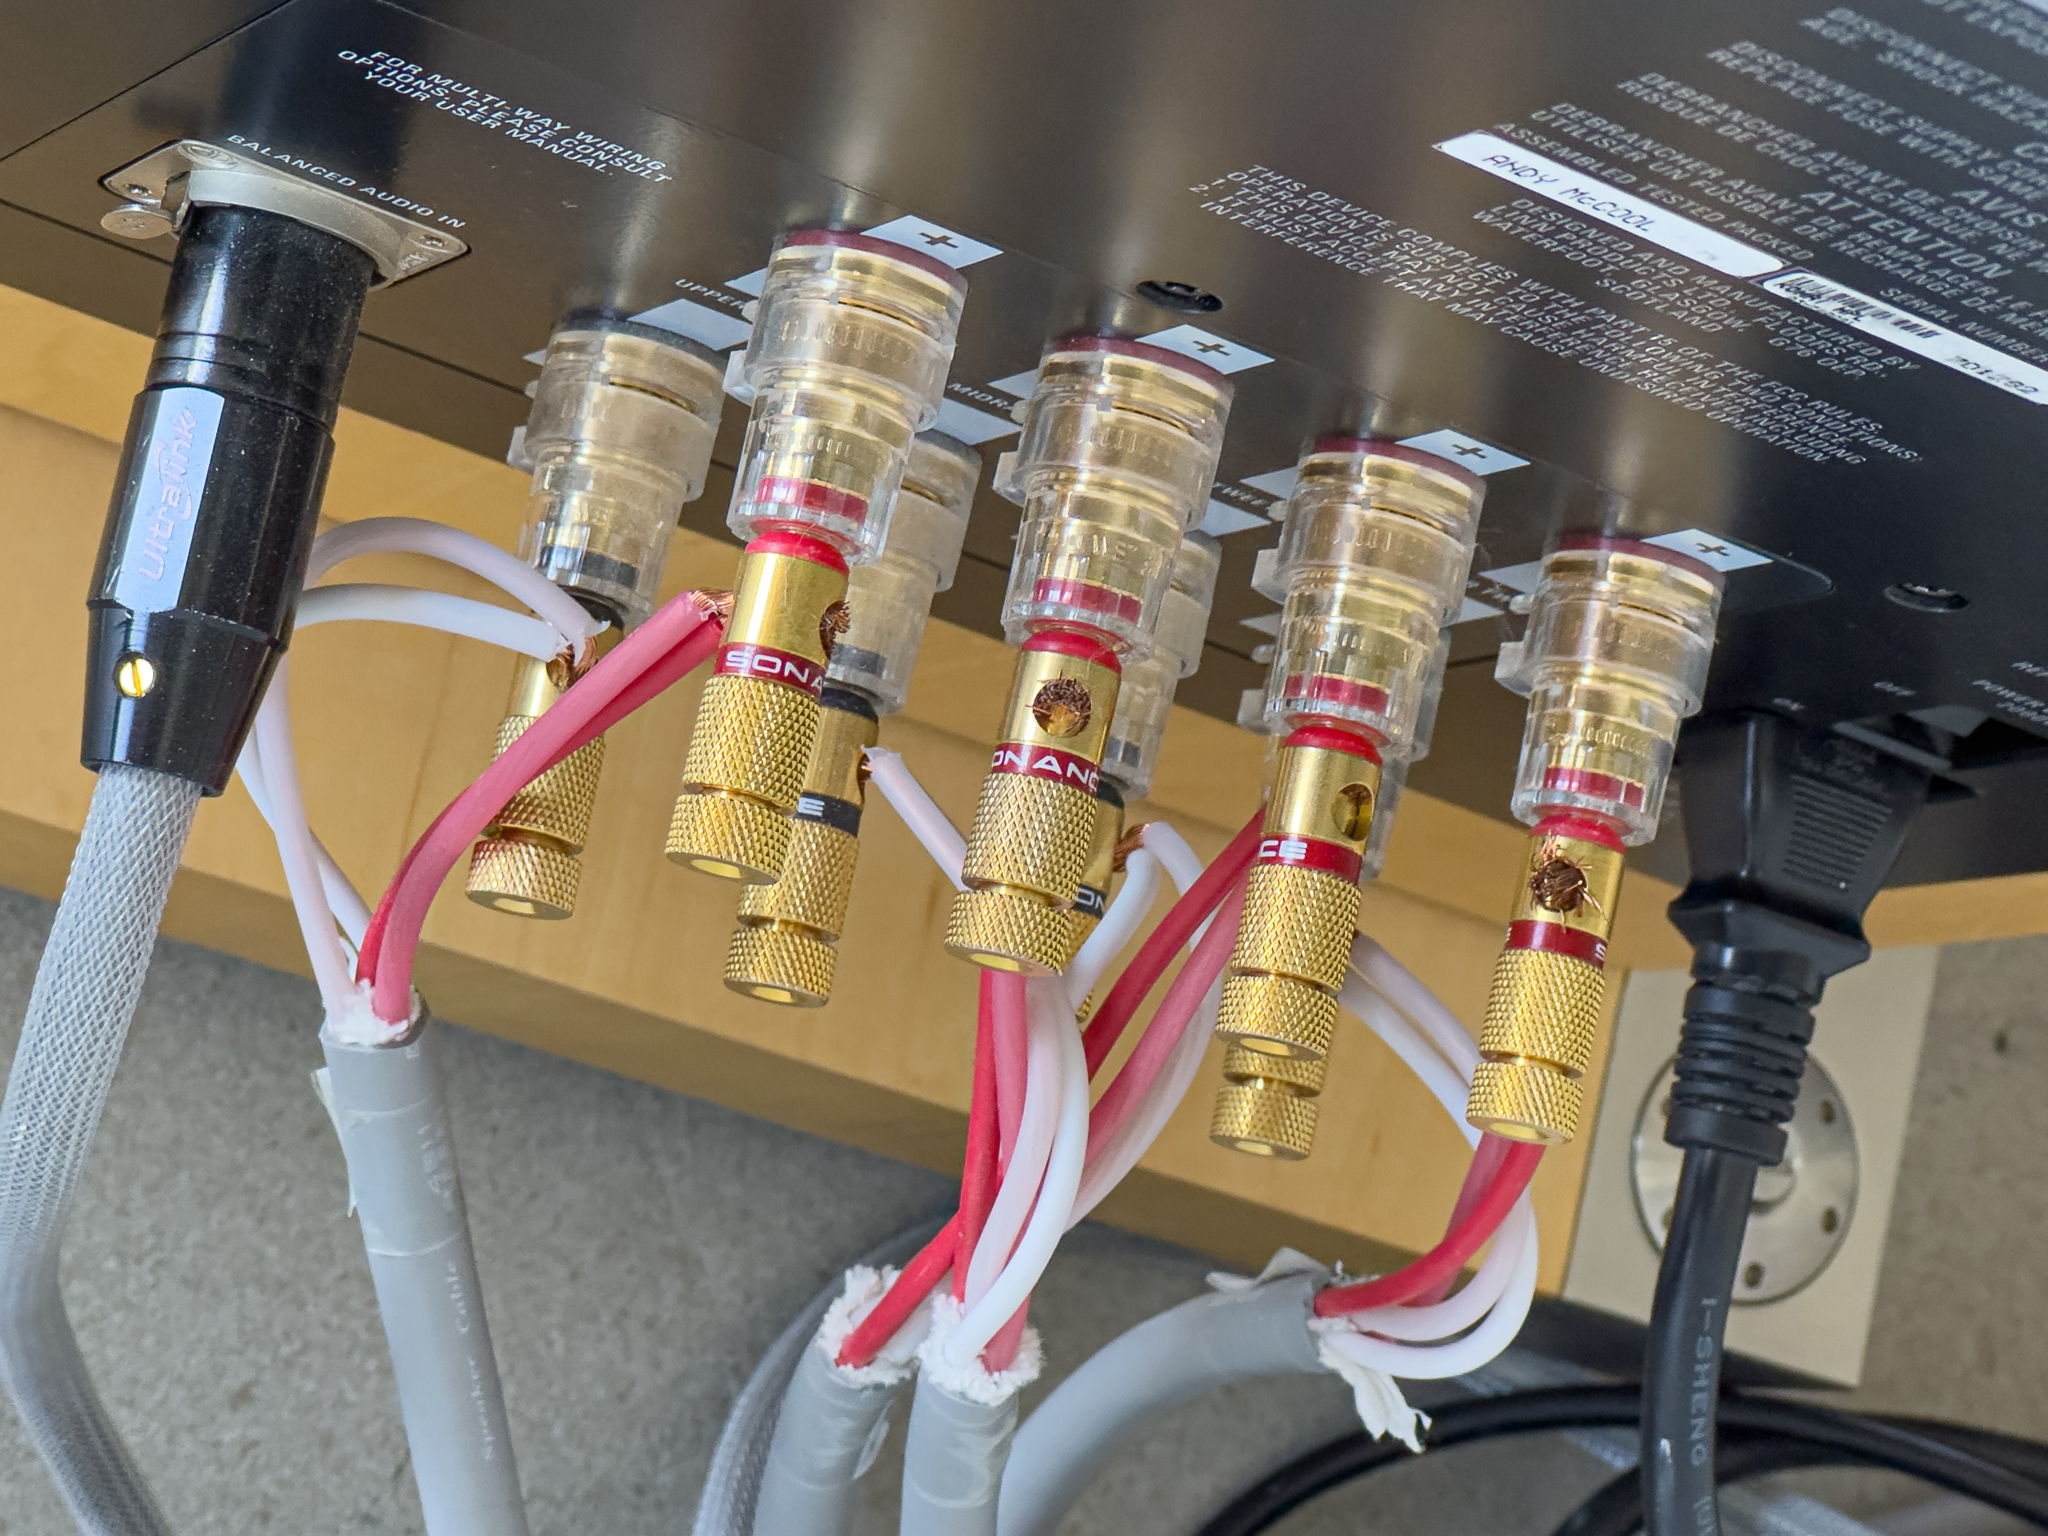 This image shows the analog speaker connections coming from the Exaktbox crossover. The XLR connector on the left feeds the Lower Bass amps inside the speaker.